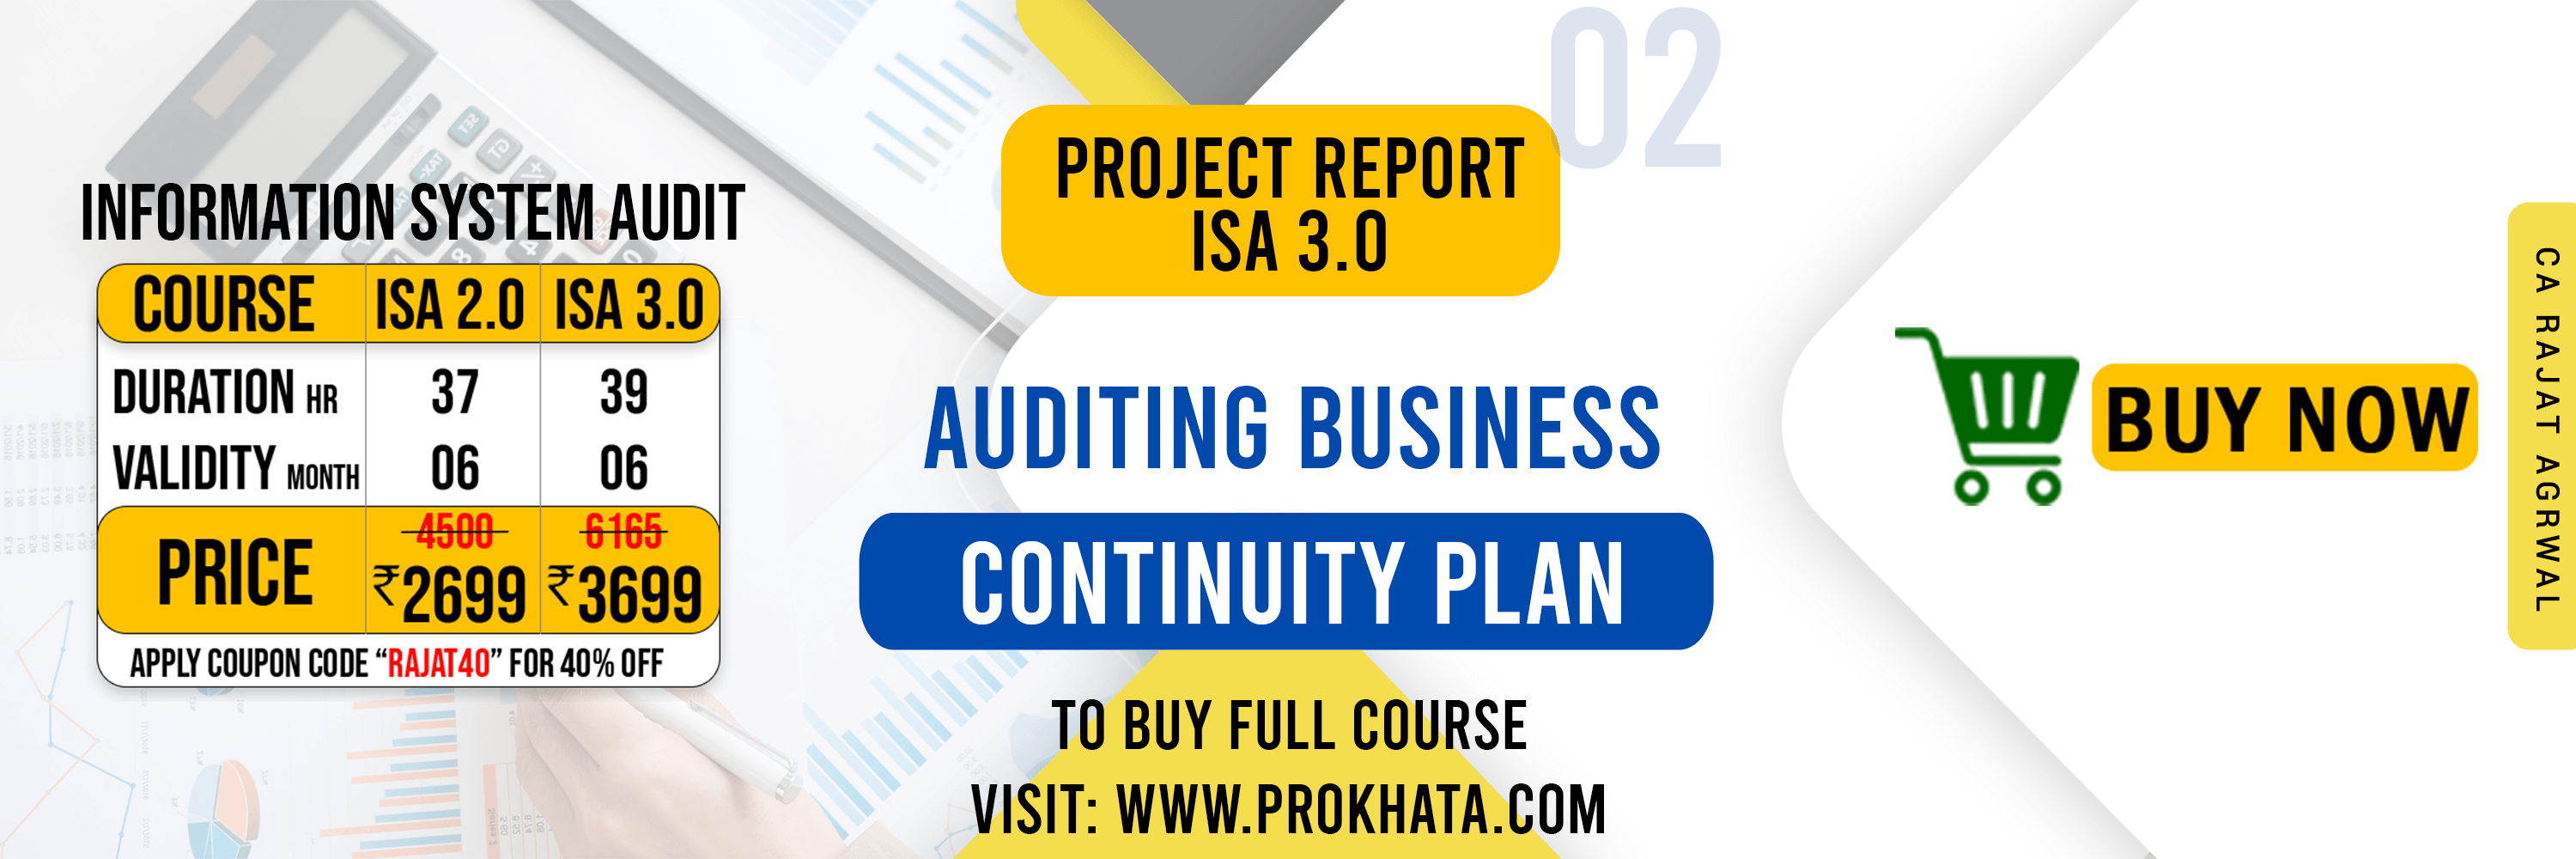 Project Report 02 AUDITING BUSINESS CONTINUITY PLAN